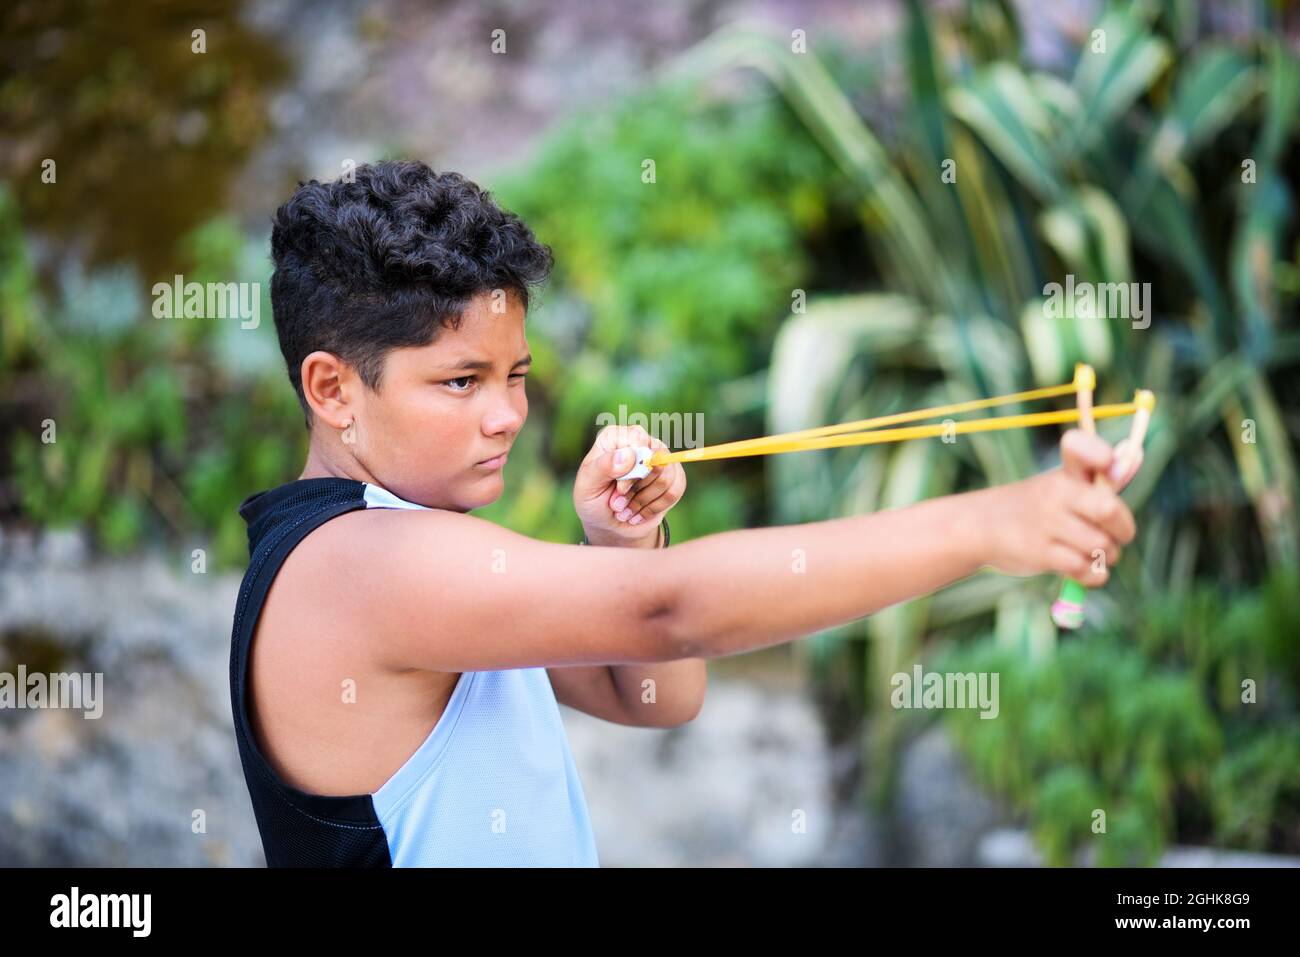 Boy with curly hair closing eyes and aiming while playing with sling on blurred background of garden on summer weekend day Stock Photo